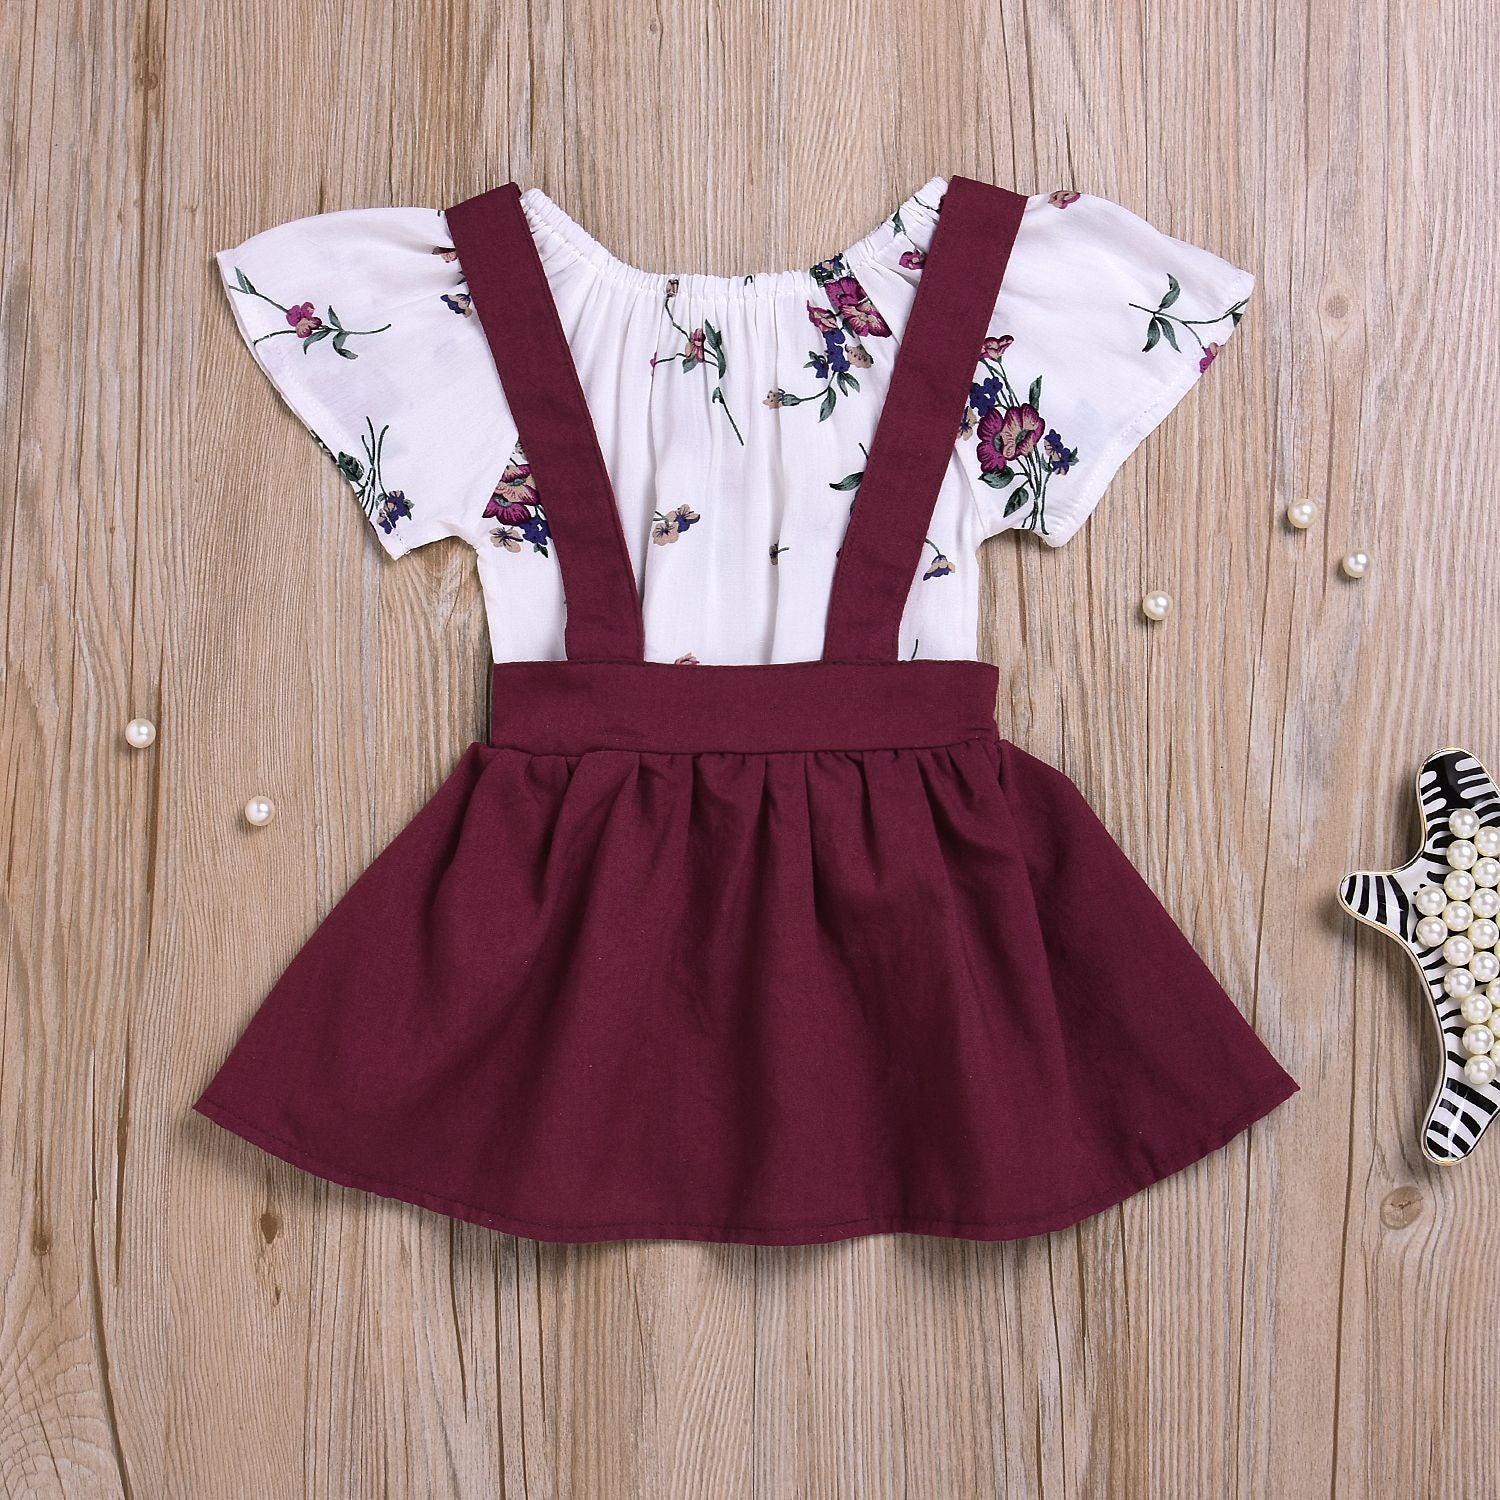 Patricia Floral Set Toddler Kids Baby Girls Floral Romper Suspender Skirt Overalls 2PCS Outfits Baby Clothing - TOYCENT 